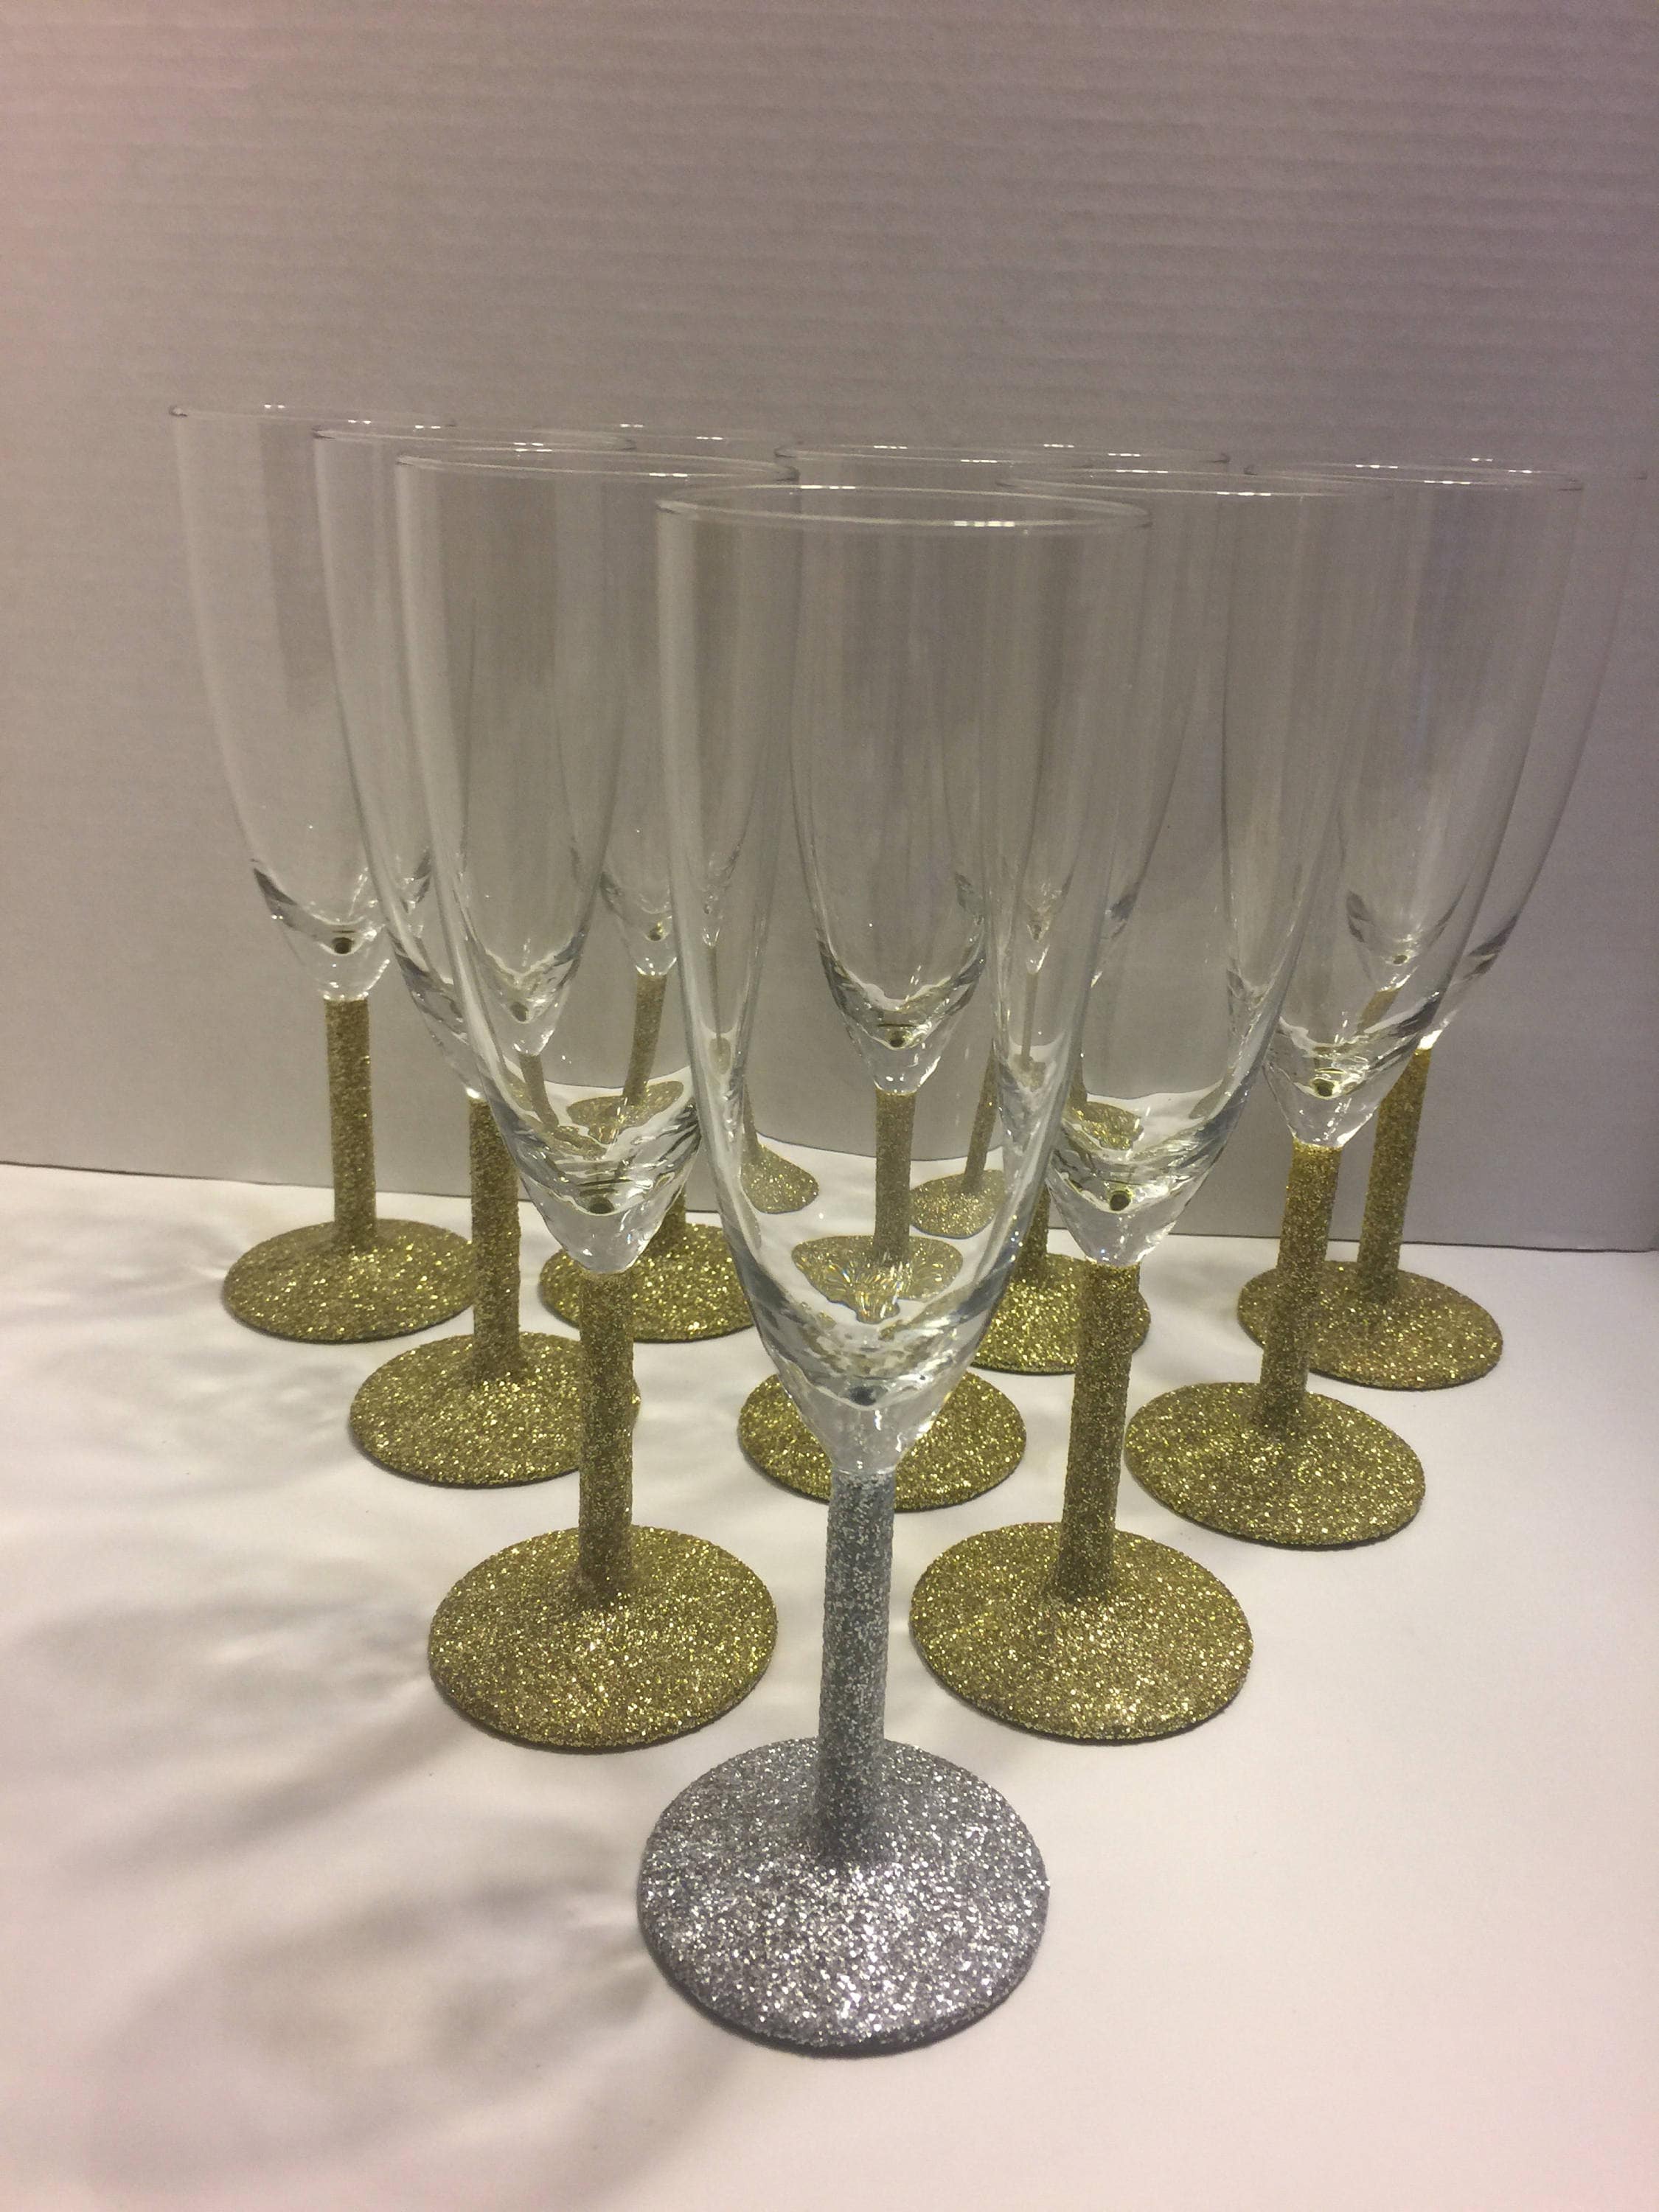 Champagne Flutes - Modern Crystal Mimosa Glasses (6 Oz) for Sparkling Wine  - Slanted Champagne Glasses Set of 4 - Birthday Gifts for Men - Christmas G  for Sale in North Brunswick Township, NJ - OfferUp